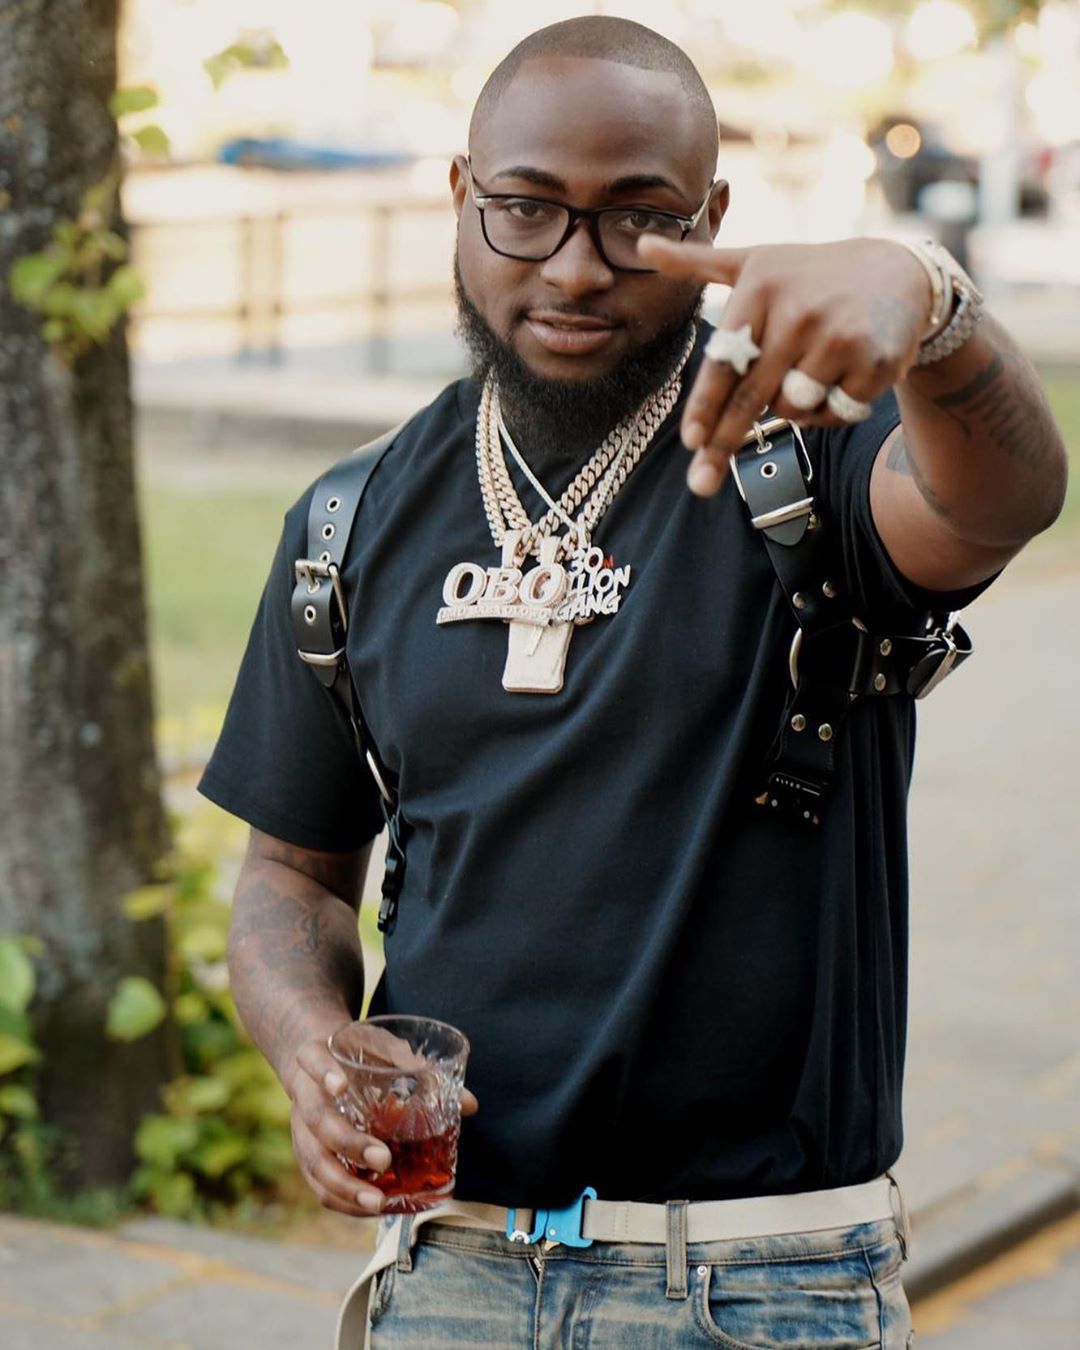 Davido reveals the front Cover of his Album with Chioma carrying his baby